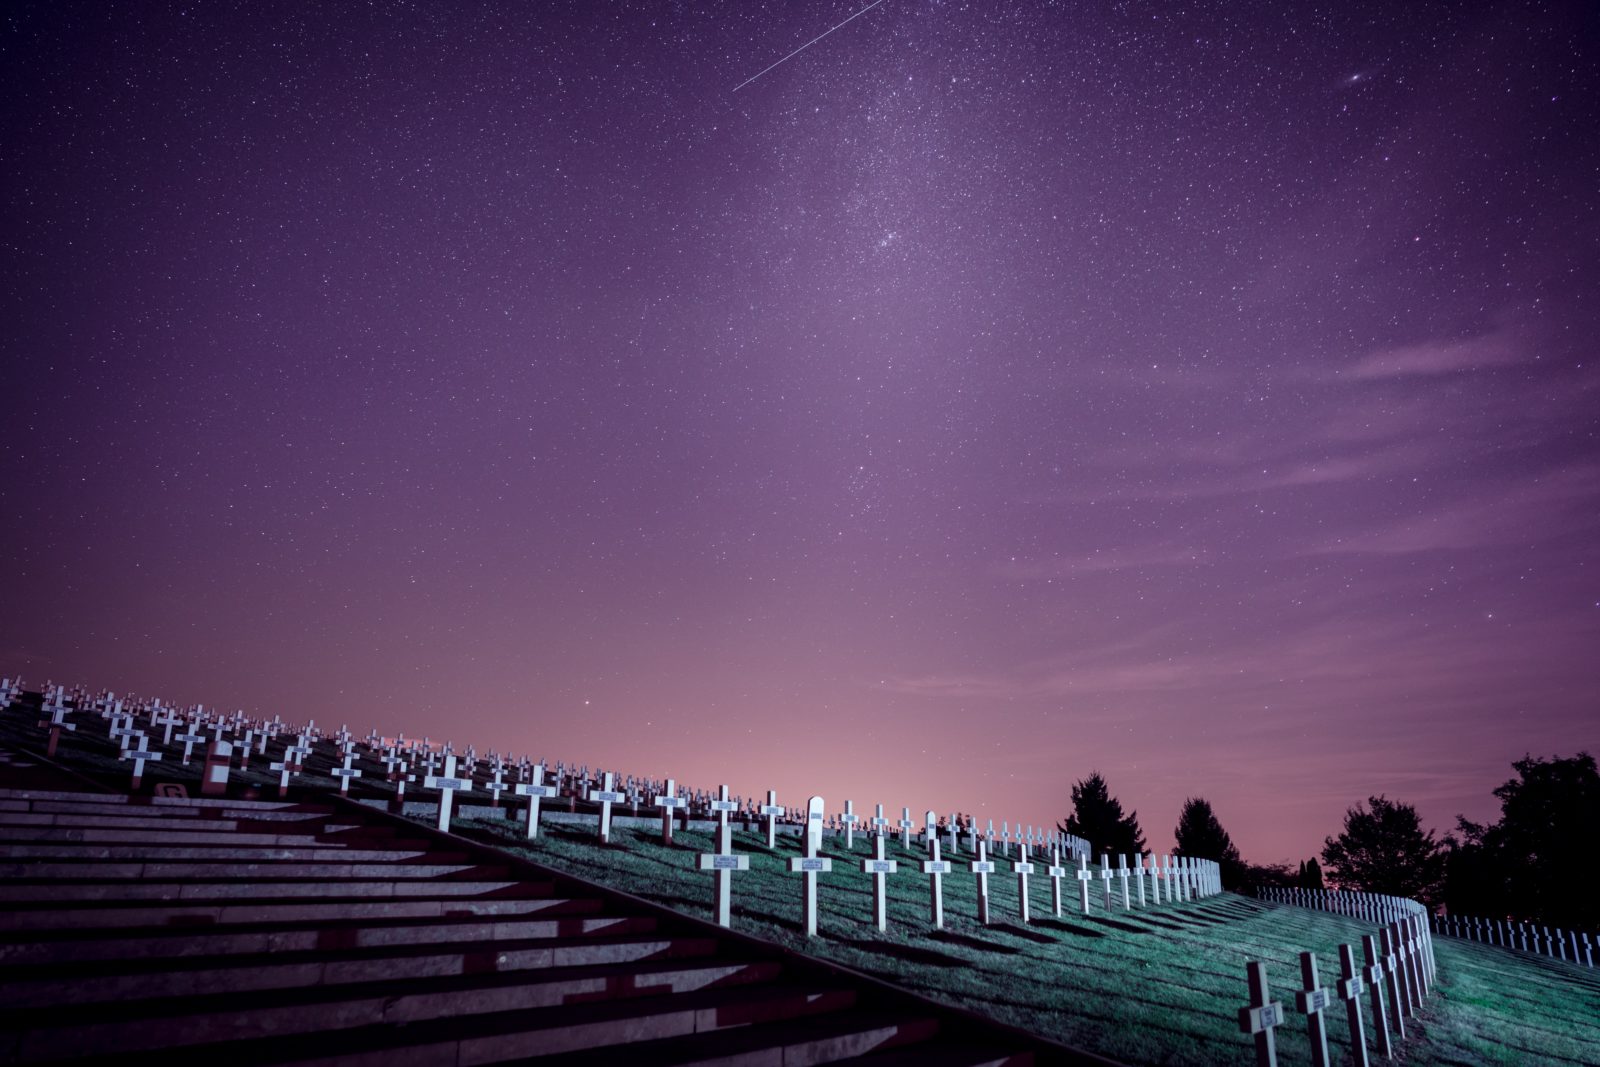 rows of graves beneath a night sky